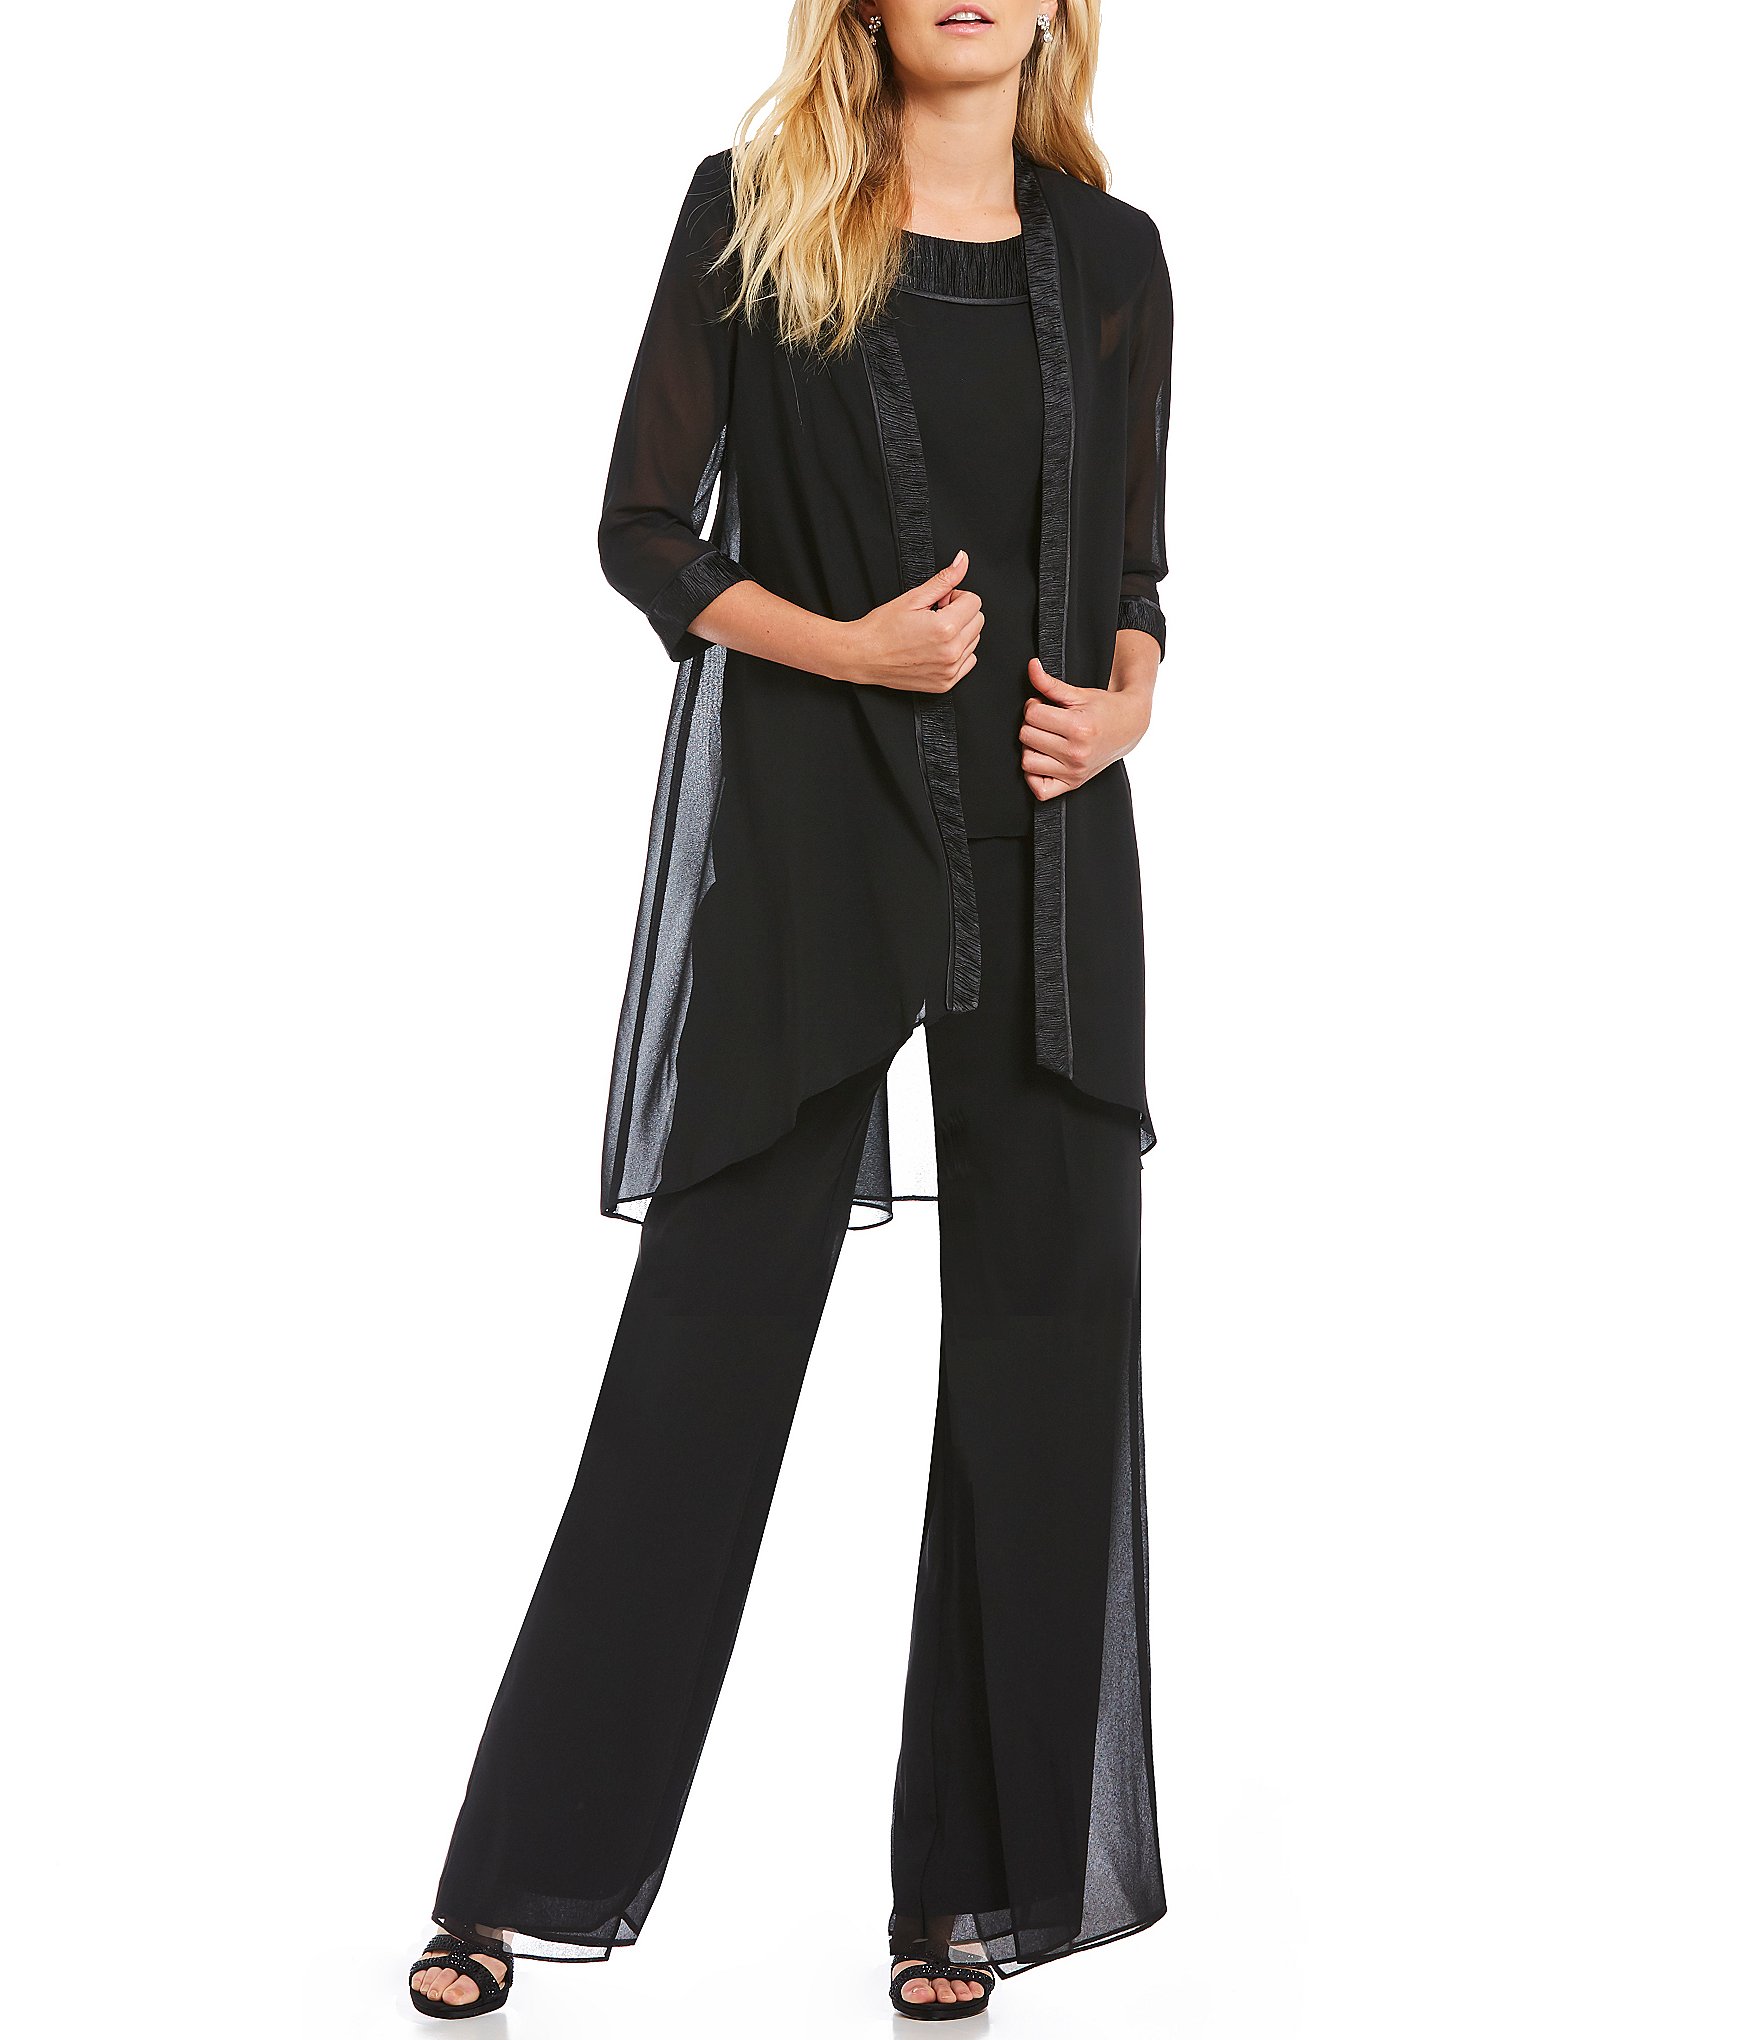 Dressy pant sets and chiffon suits that work for any daytime or evening formal occasion.